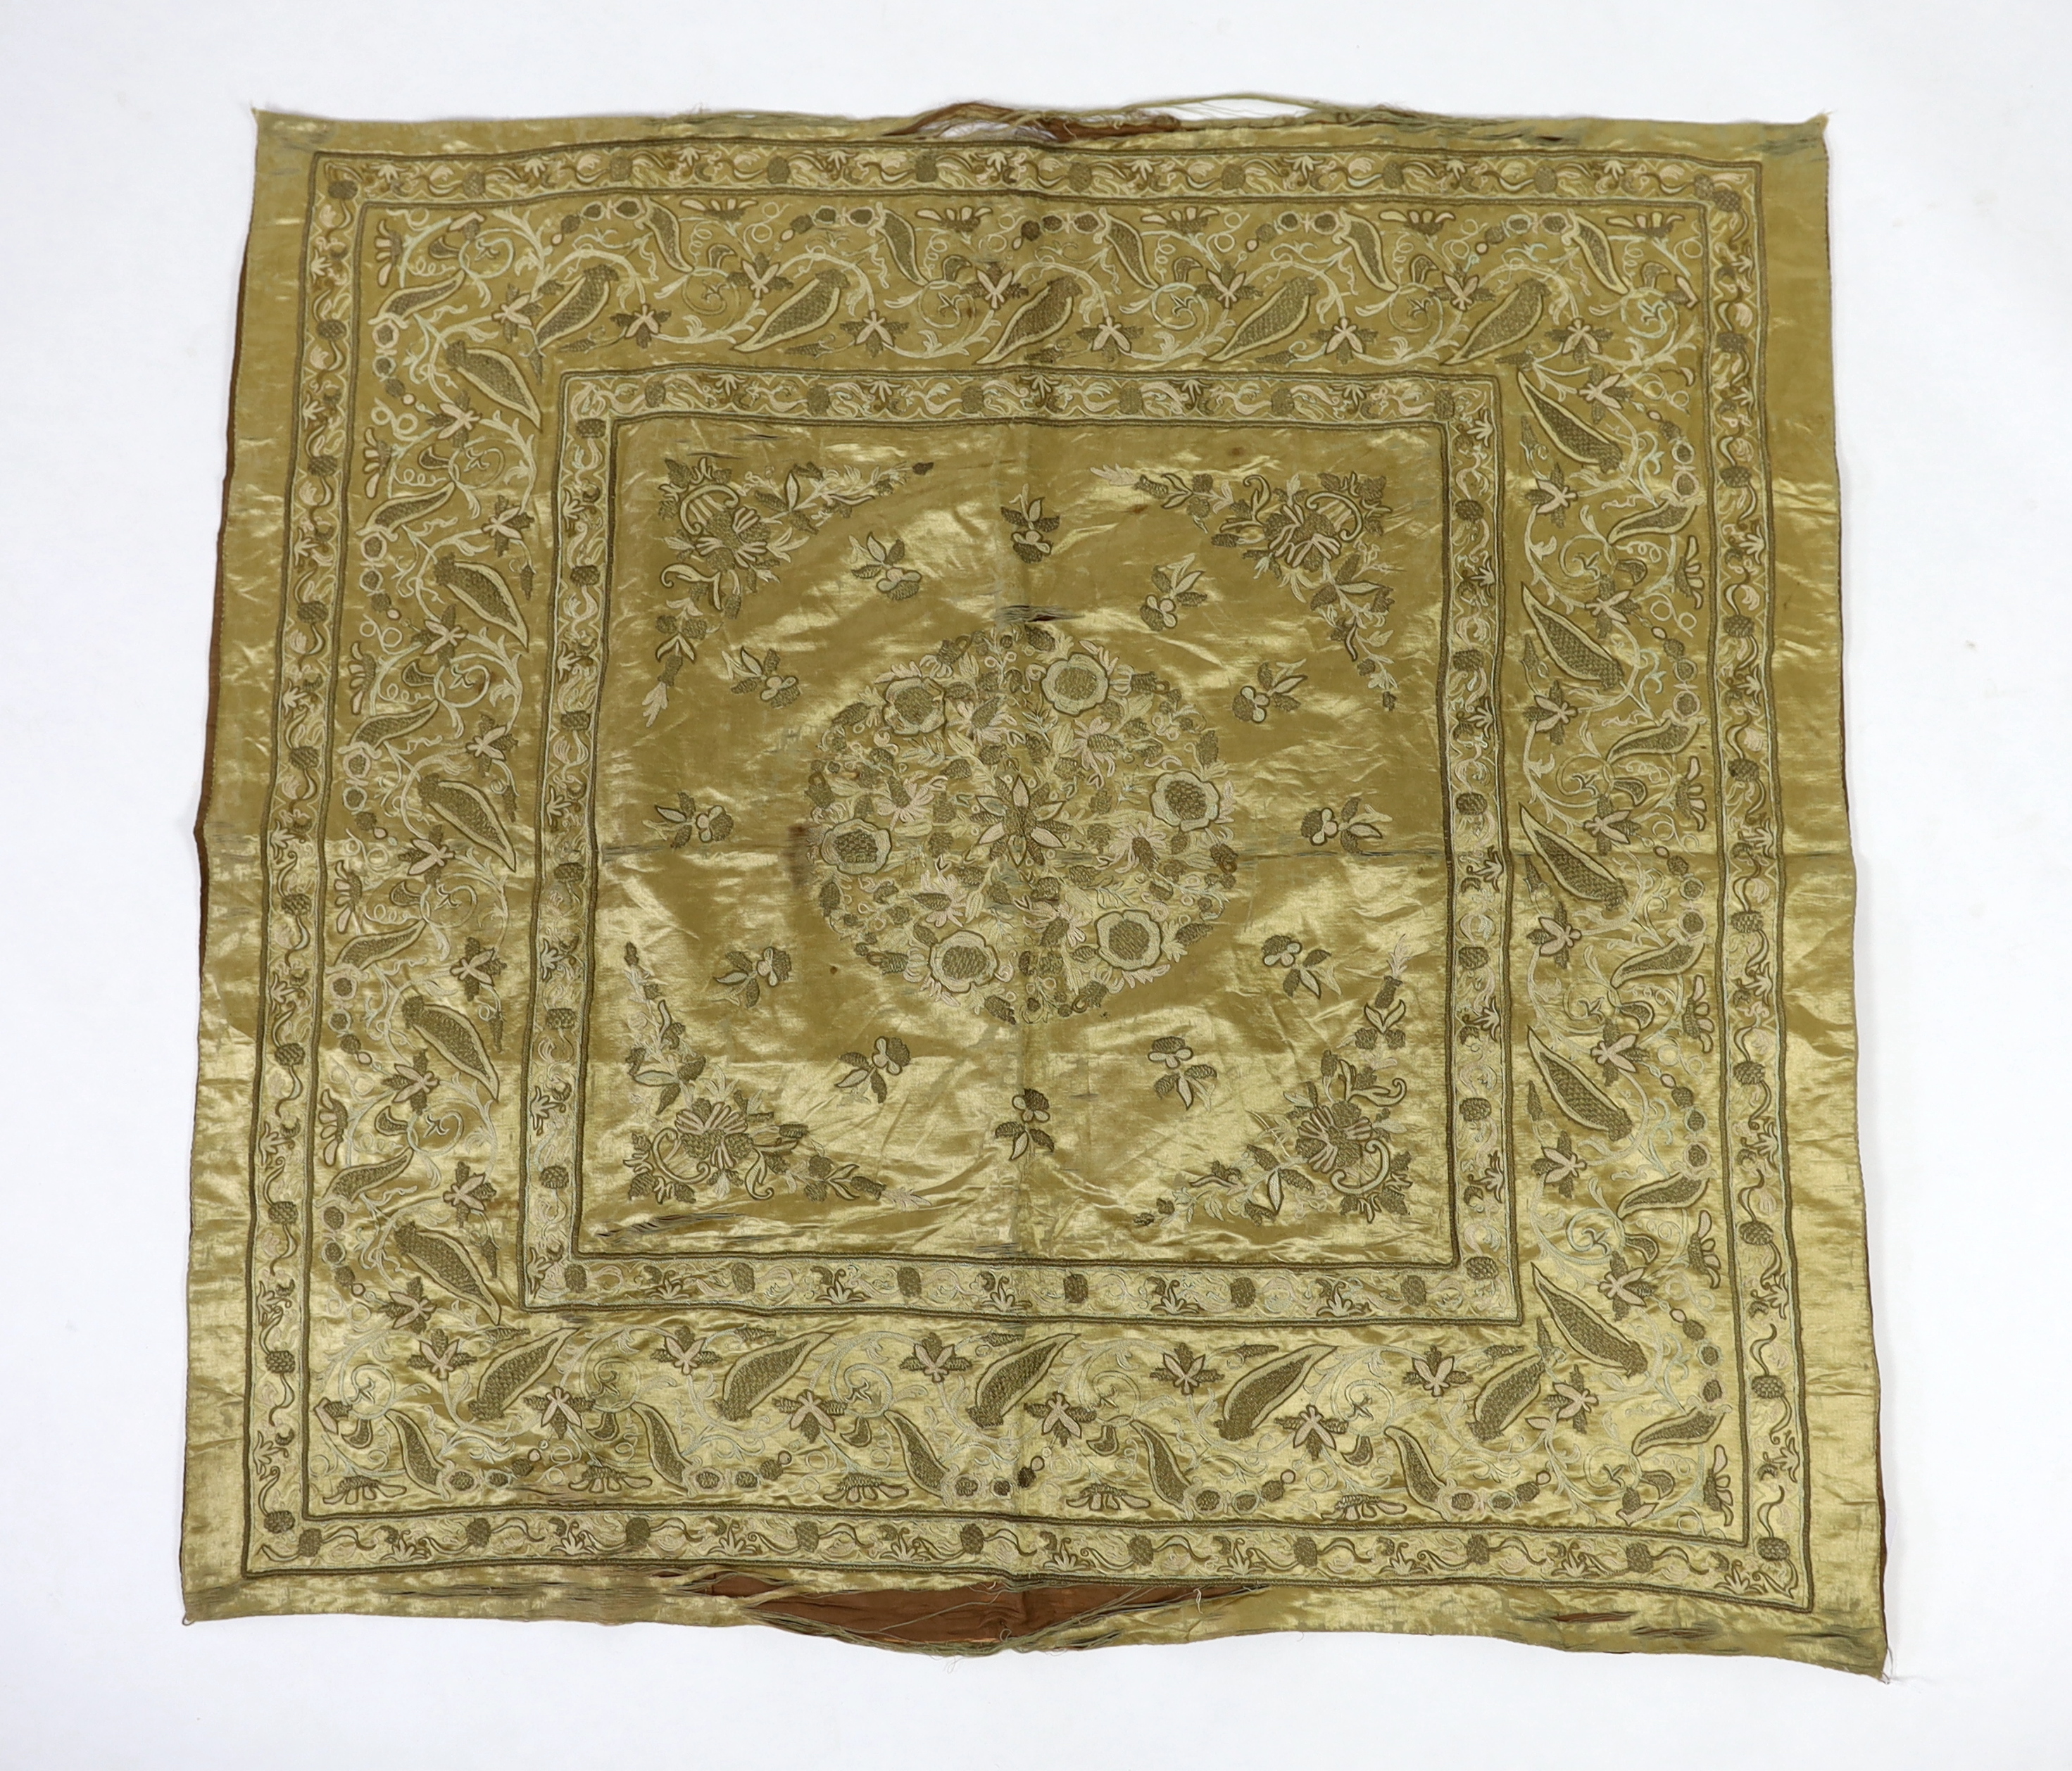 A late 19th century Turkish metallic thread and chain stitch silk satin cover, embroidered with a central cartouche of flowers and print, with rows of various borders with similar embroidery, 123 x 116cm                 